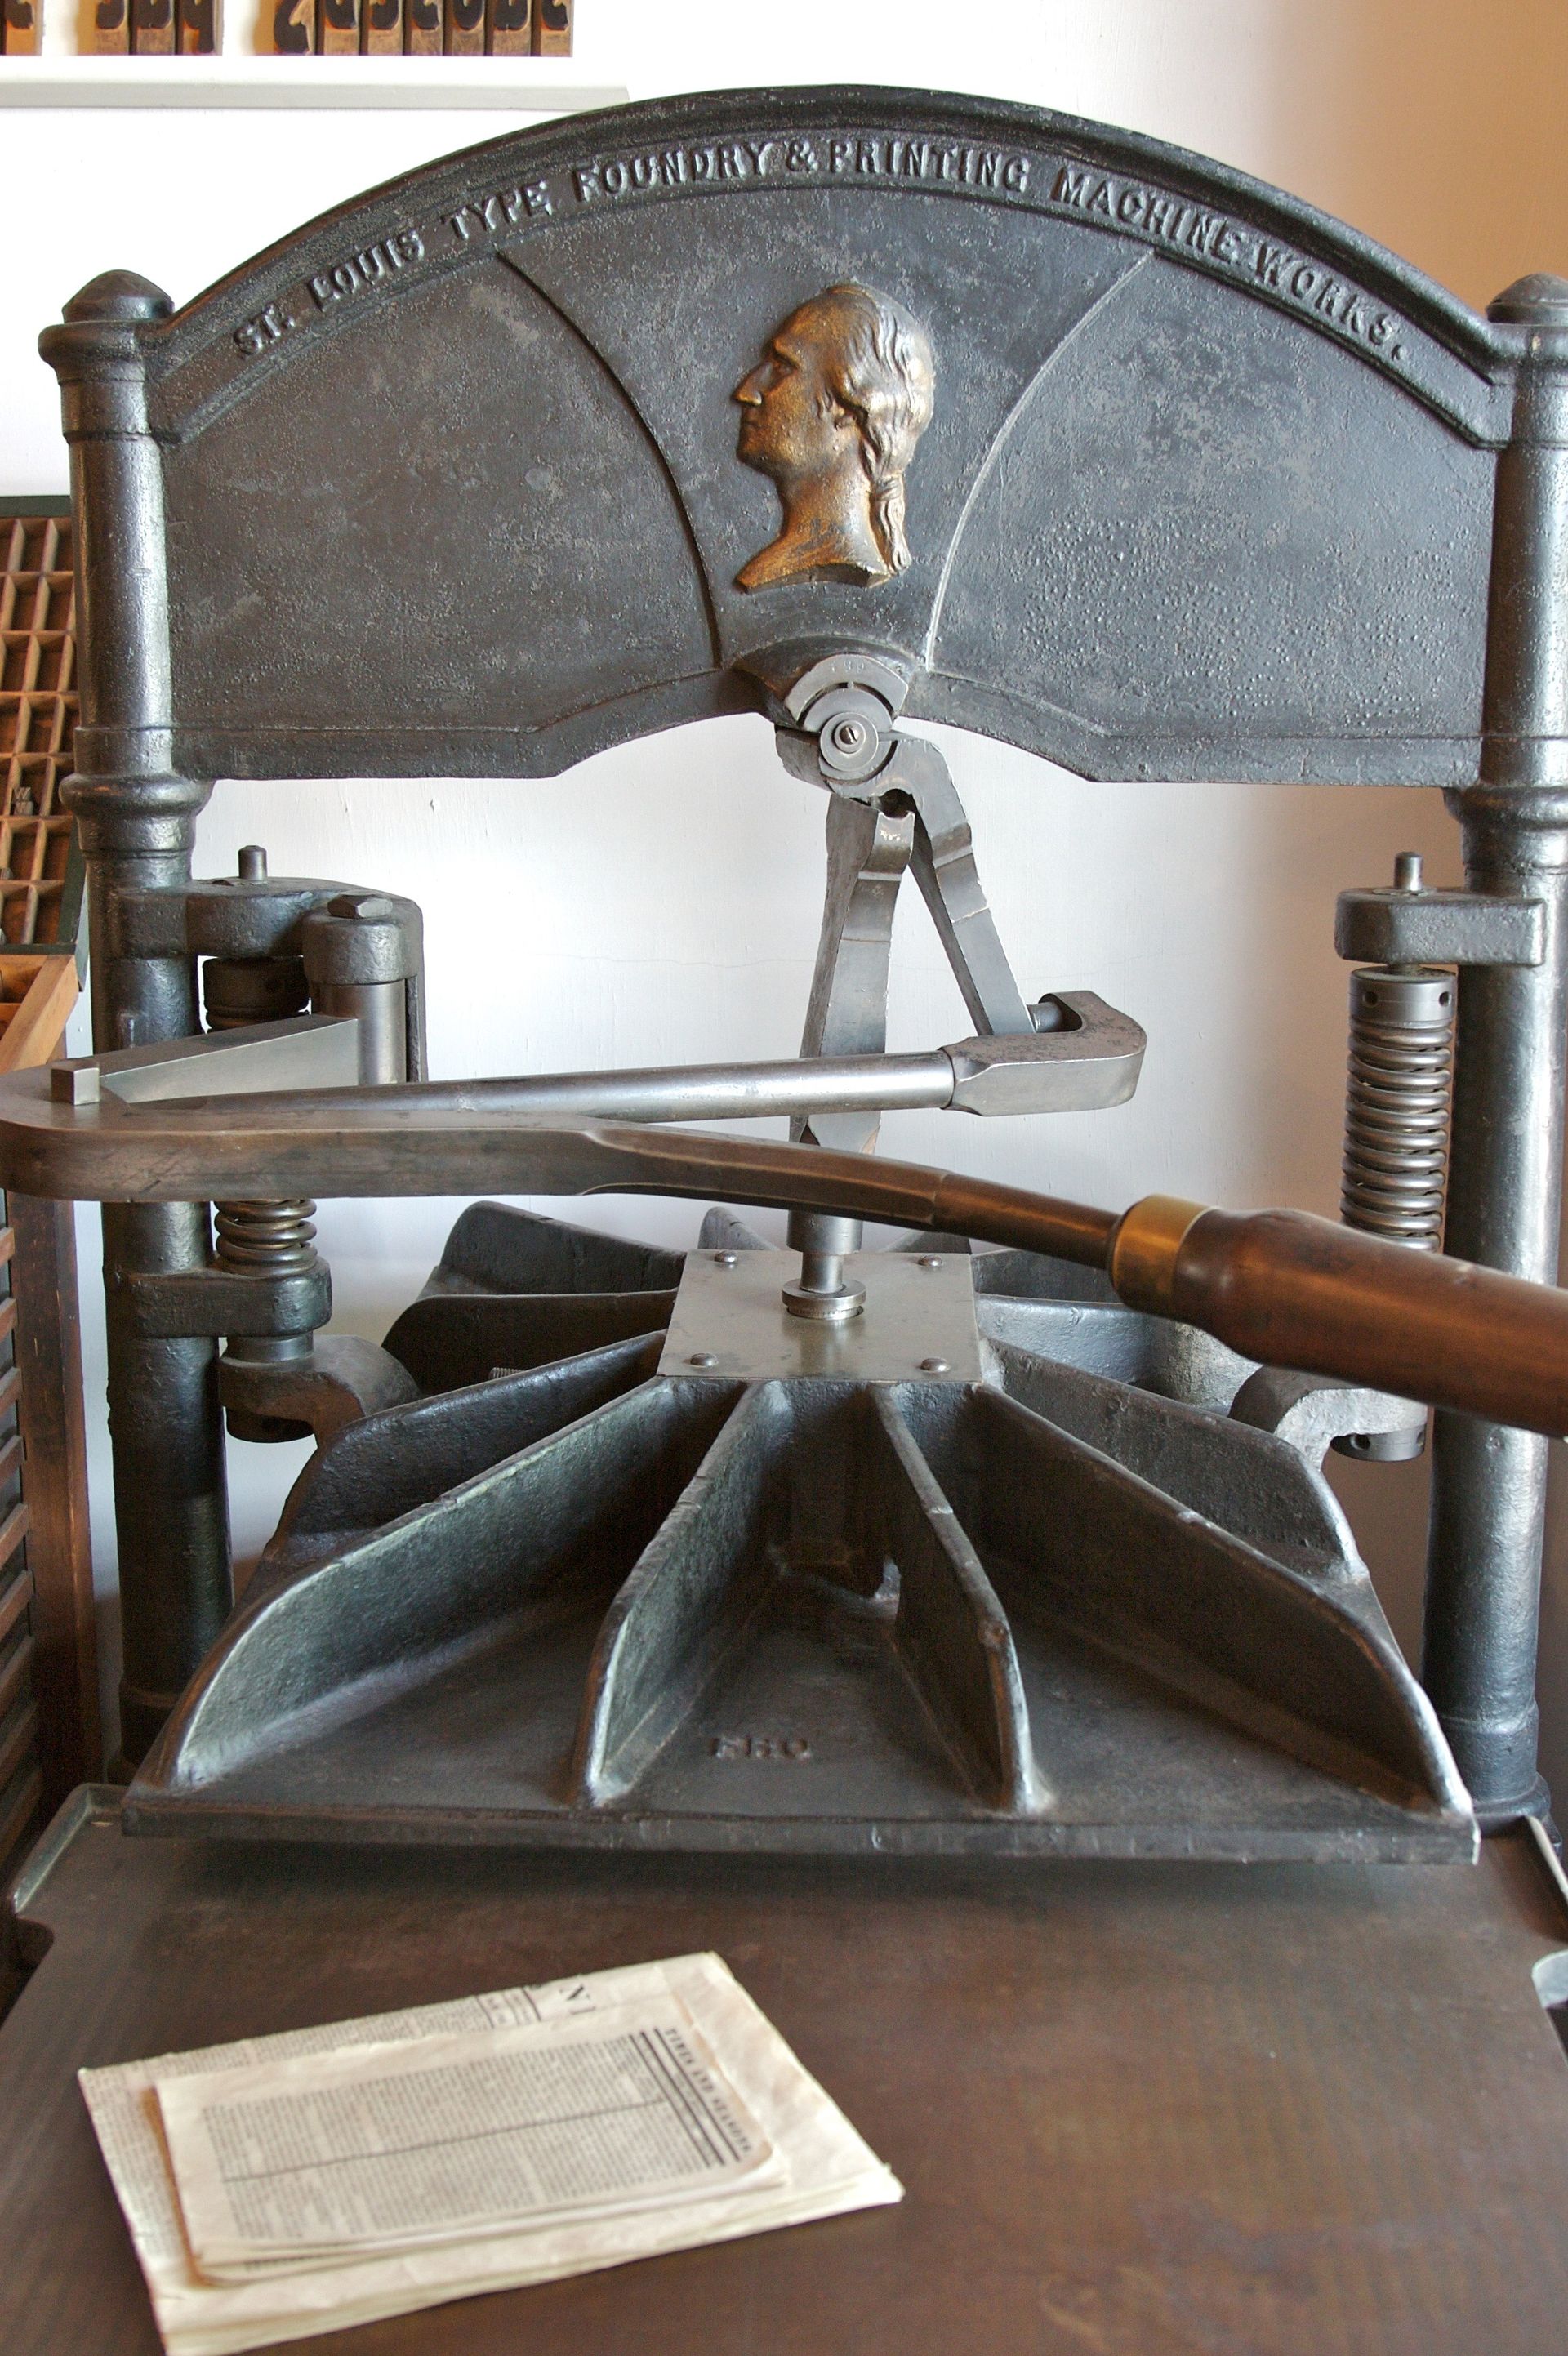 A picture of a printing press at the Nauvoo print shop.